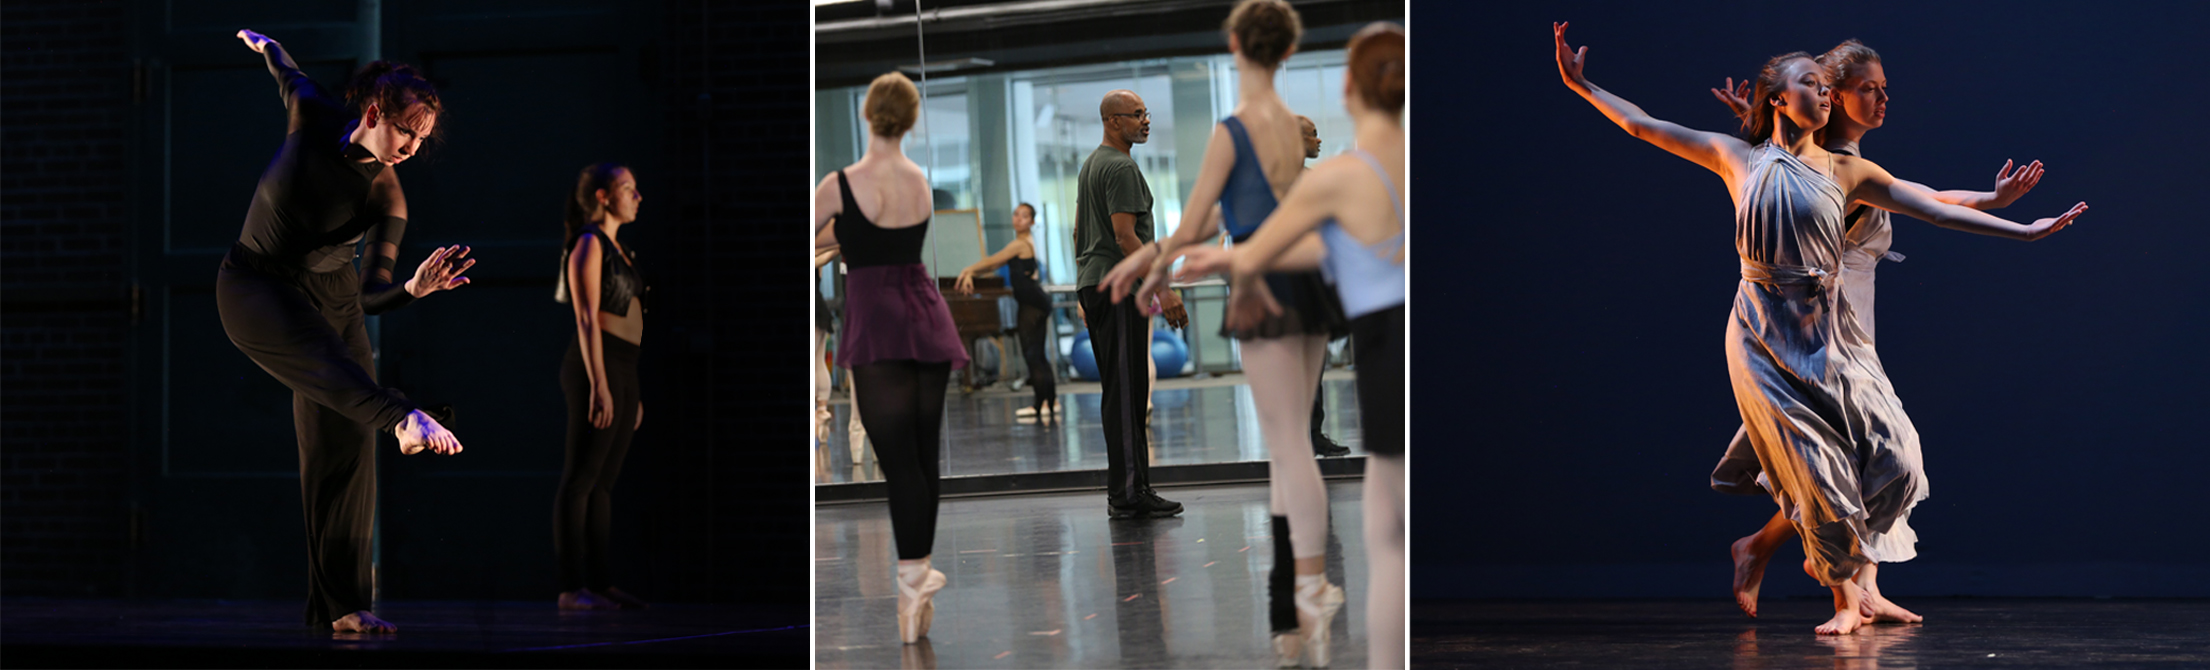 Students doing ballet in a sunny studio